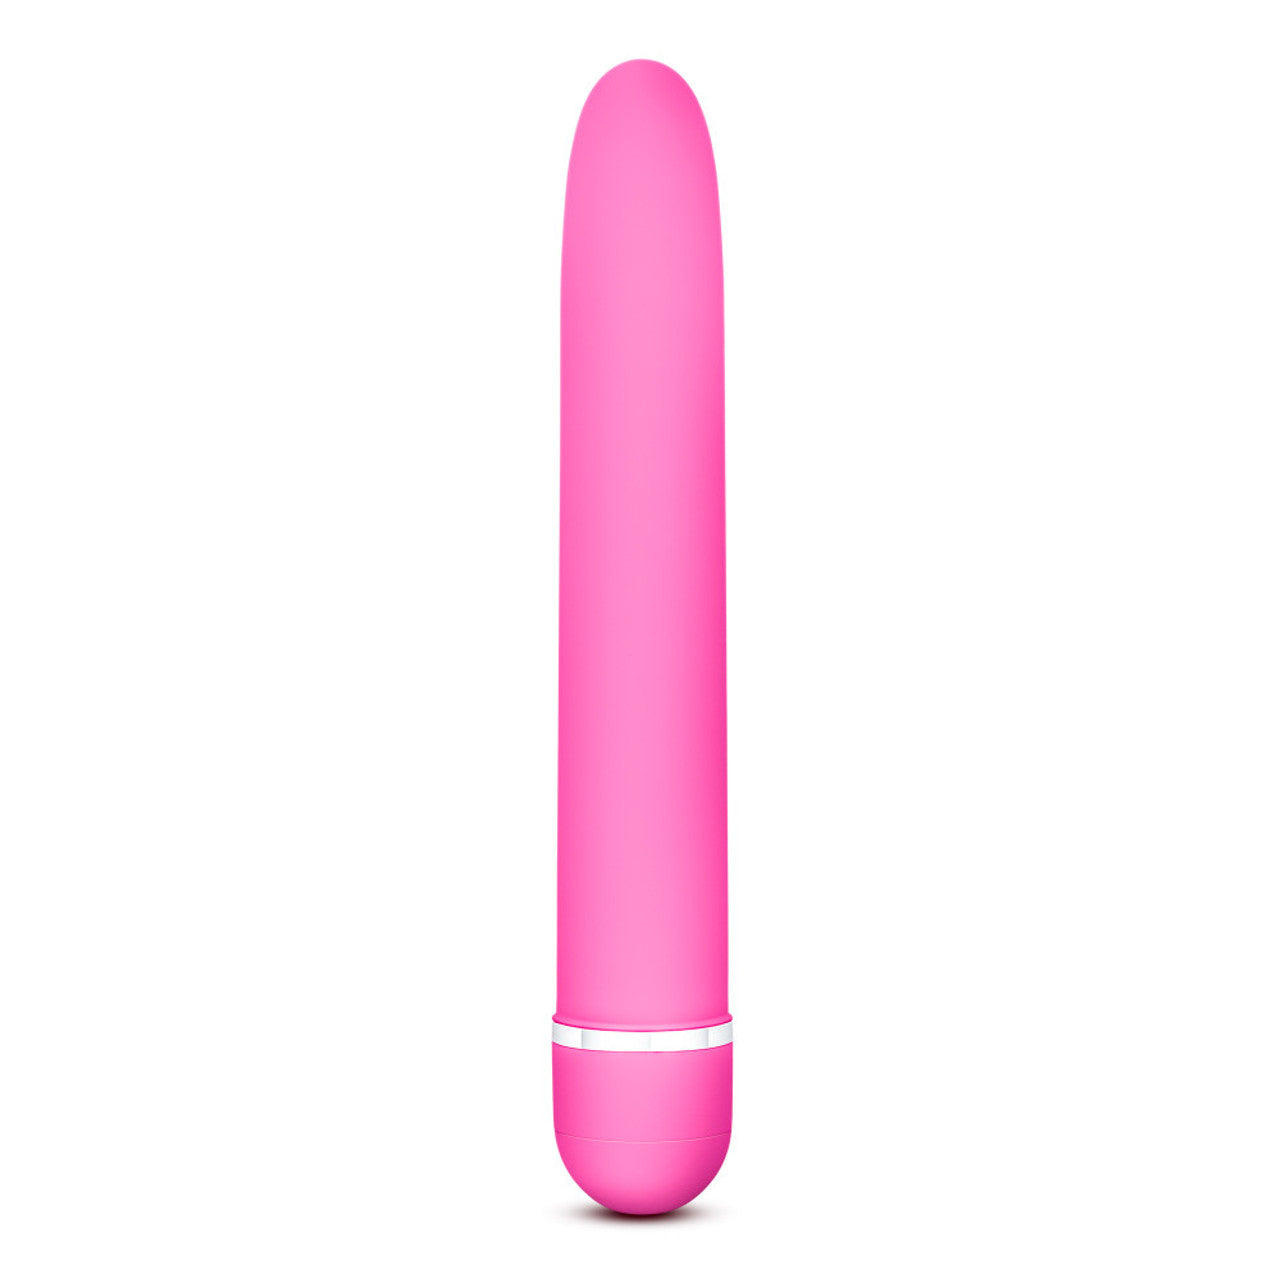 Rose Luxuriate 7" Vibrator- Pink - Thorn & Feather Sex Toy Canada